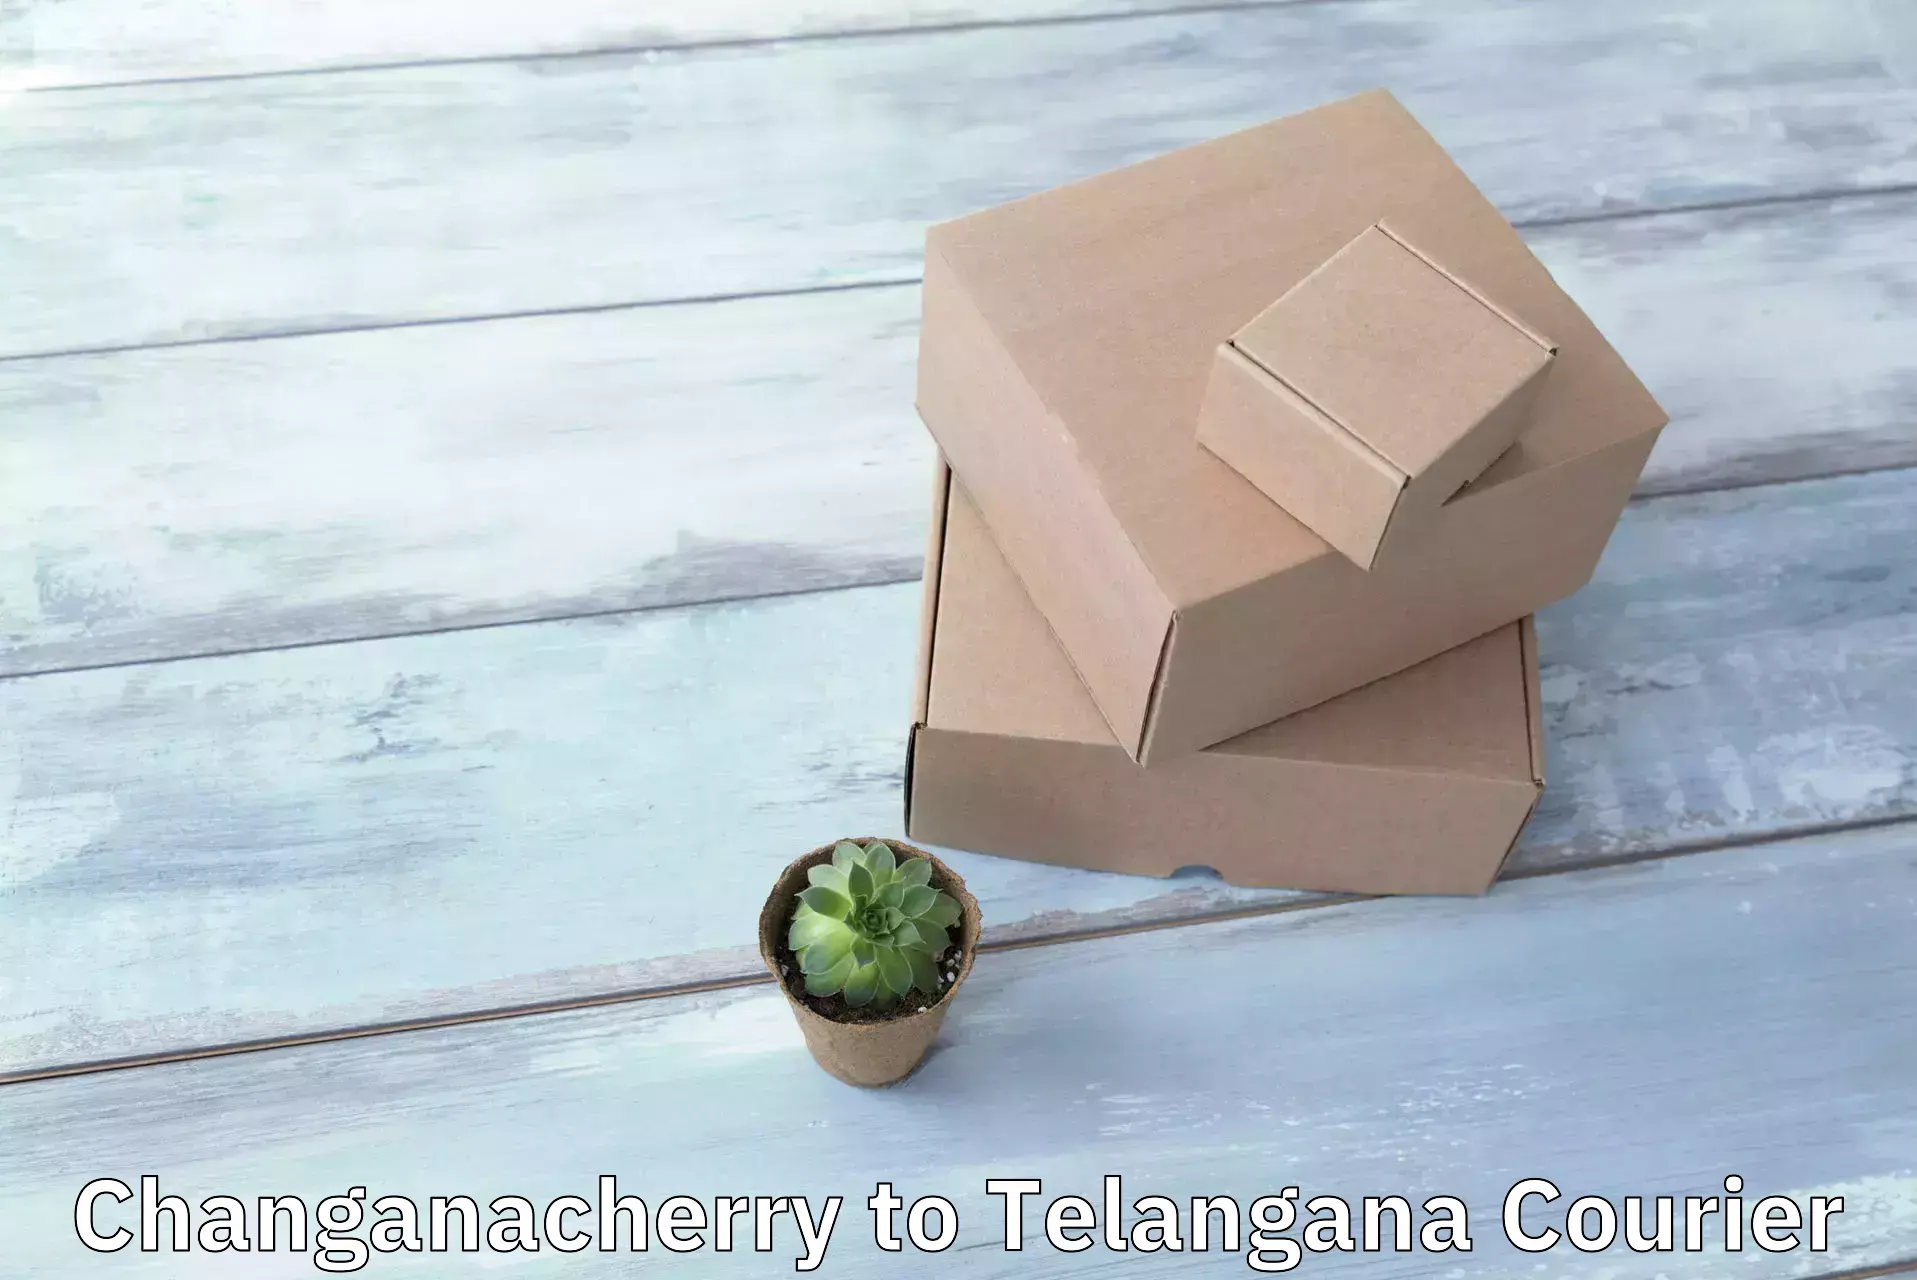 Fast delivery service Changanacherry to Siddipet